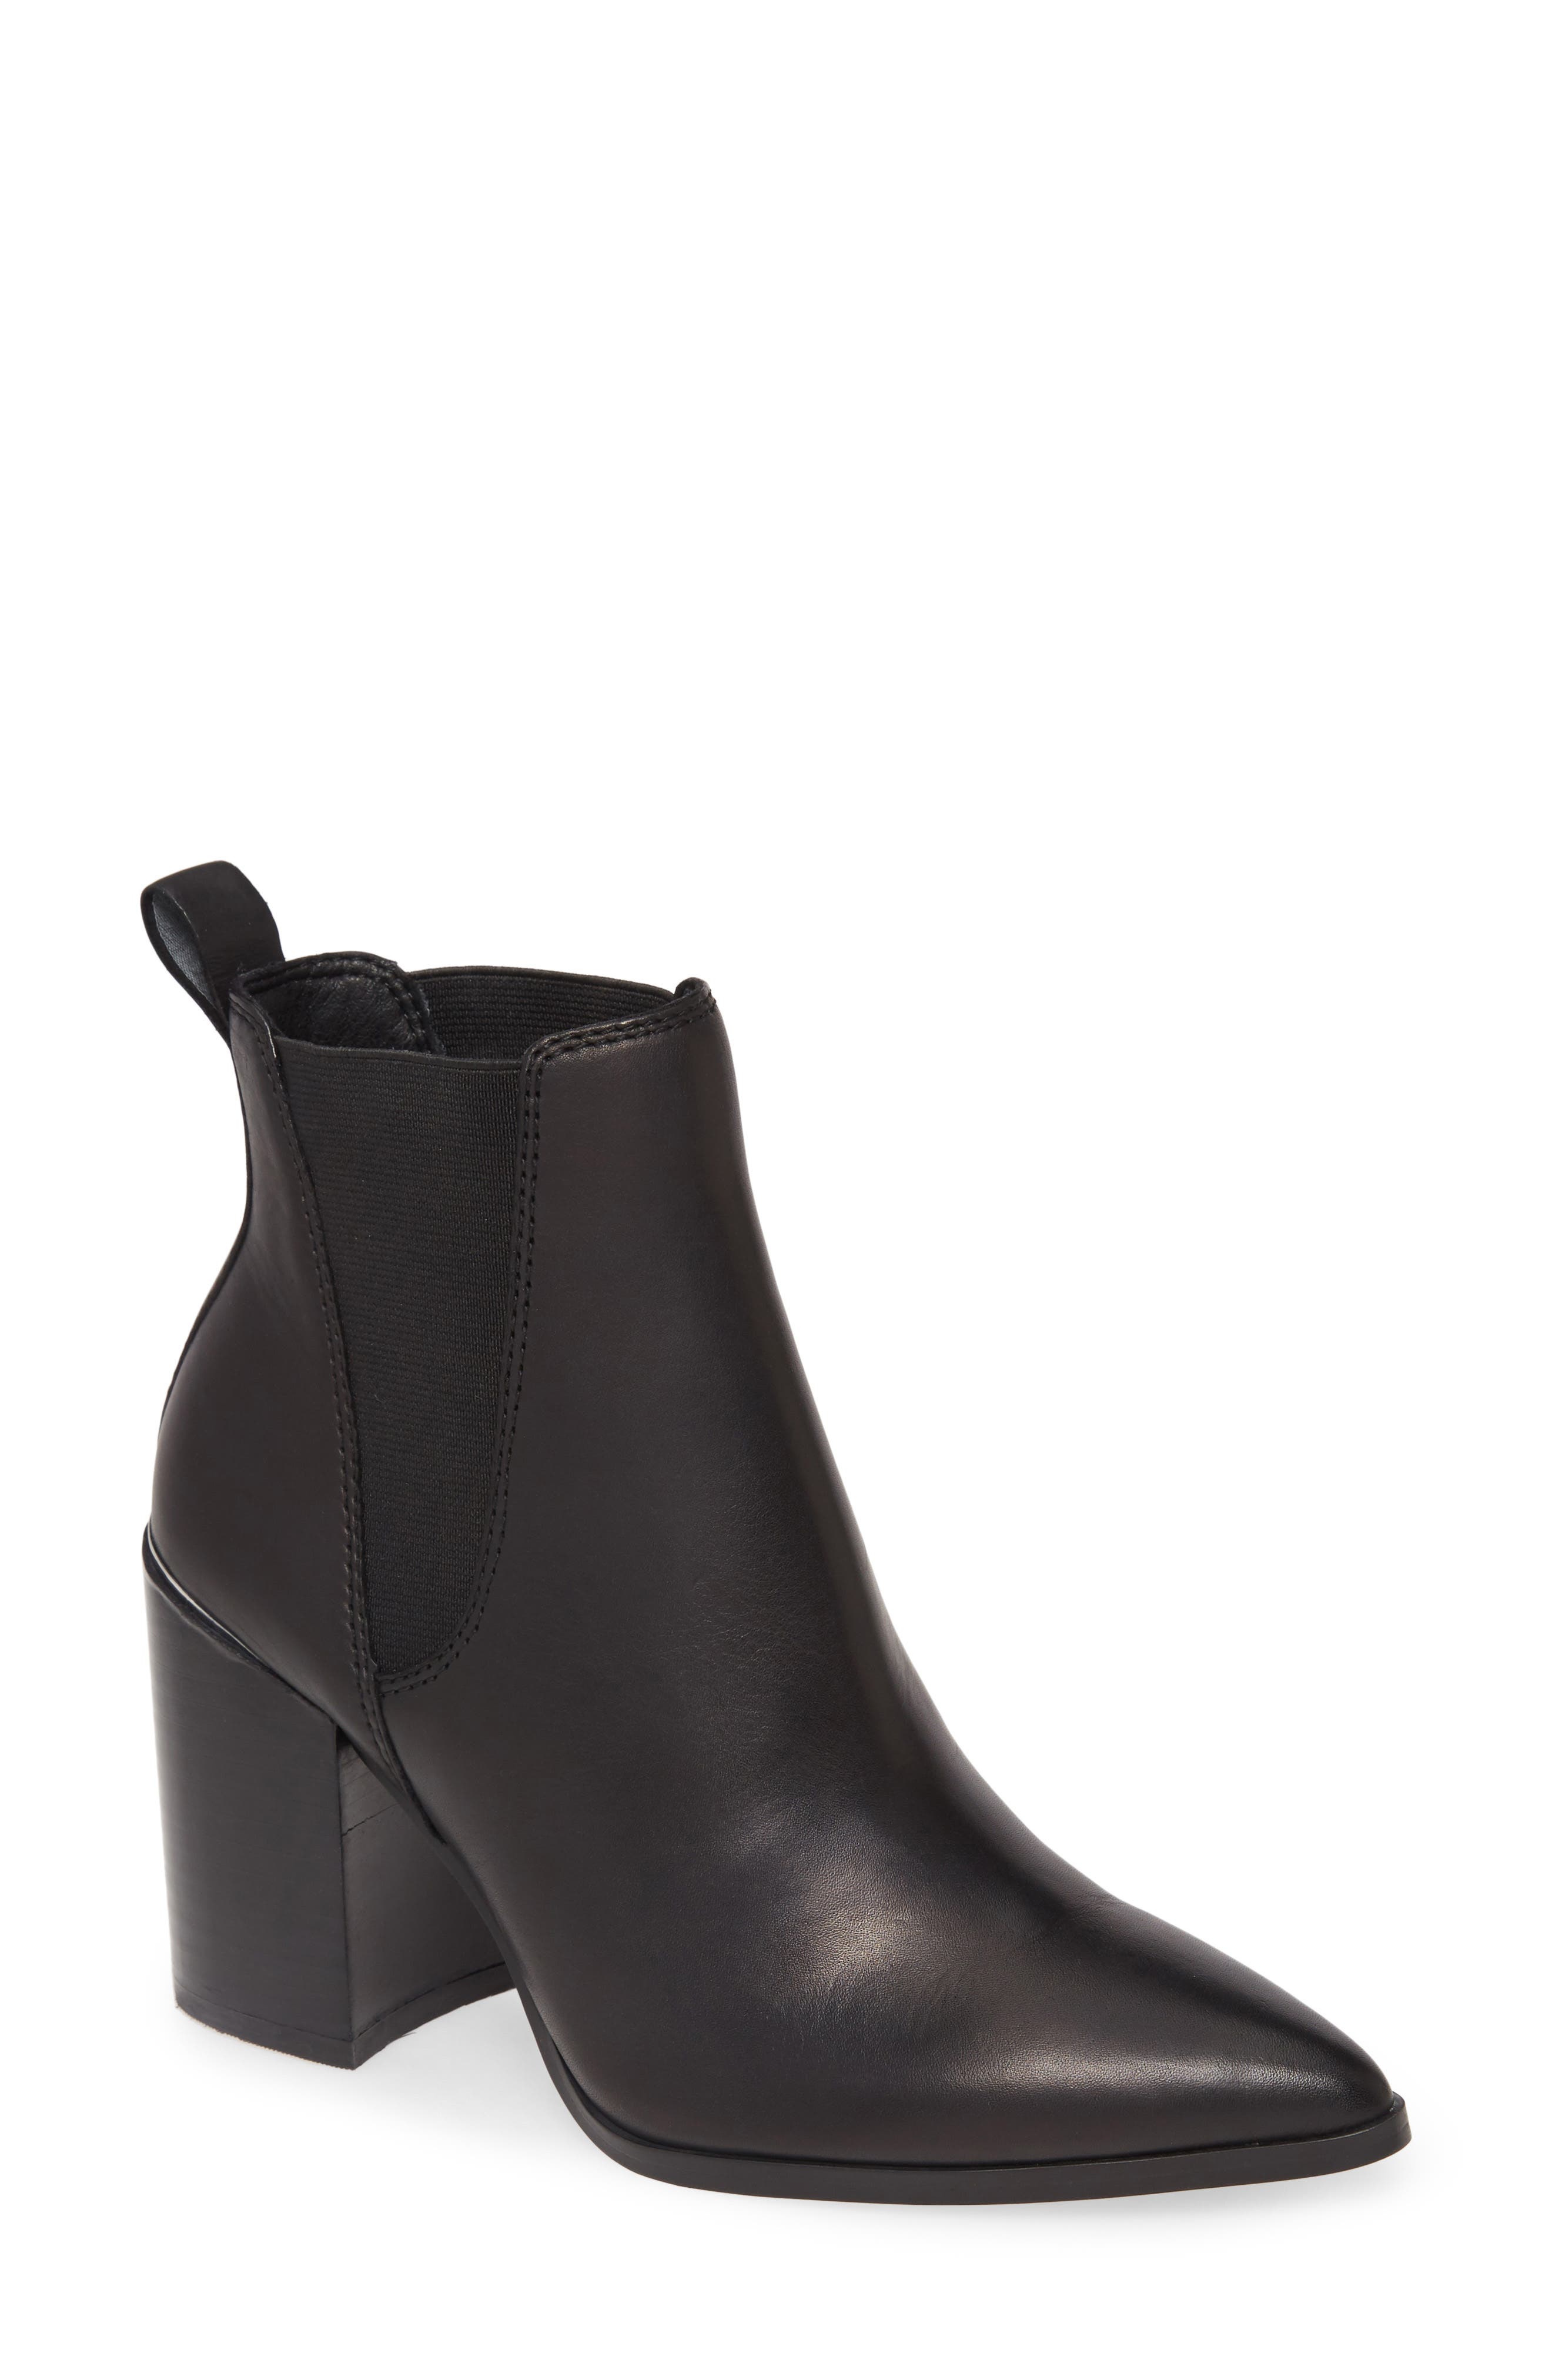 Steve Madden Knoxi Pointed Toe Bootie 